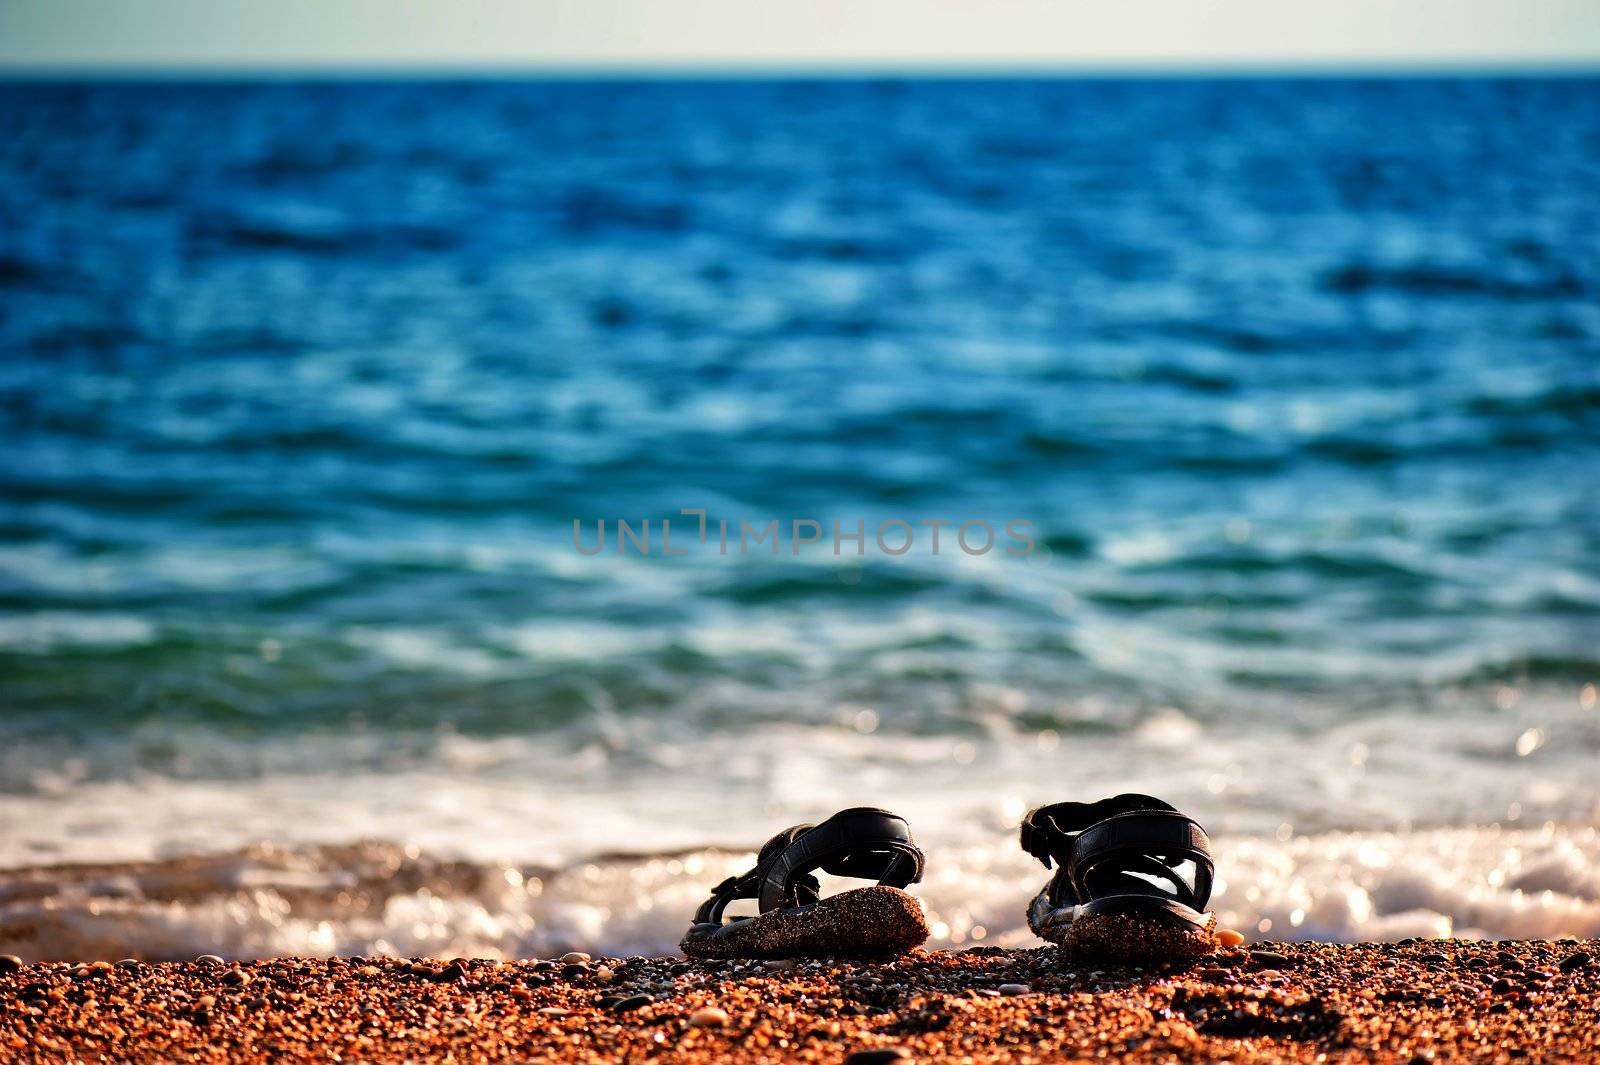 Beach shoes at the edge of the sea on the sandy beach. by kosmsos111